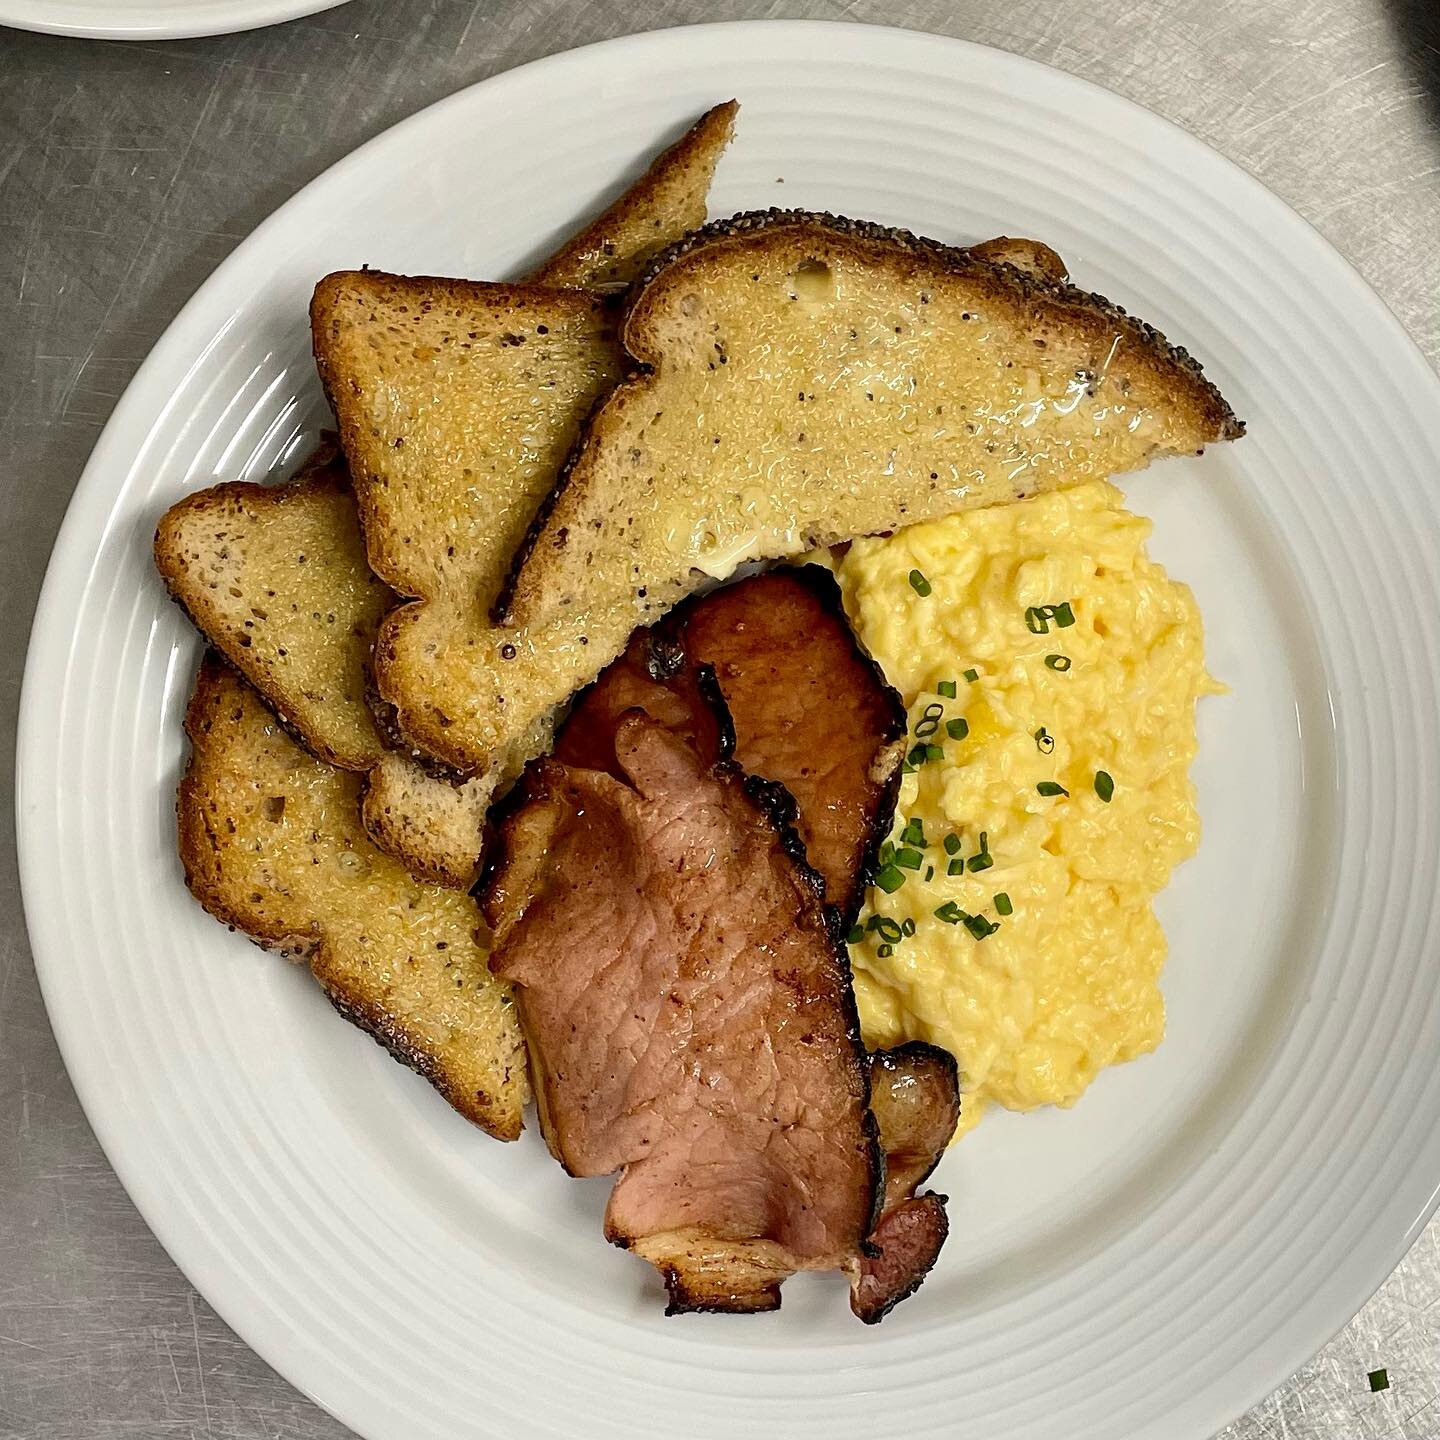 Our gluten-free scrambled eggs on toast with extra treacle-cured bacon. We bake all our own breads except for gluten free, which we buy in especially from @promiseglutenfree and which we find to be the best around.